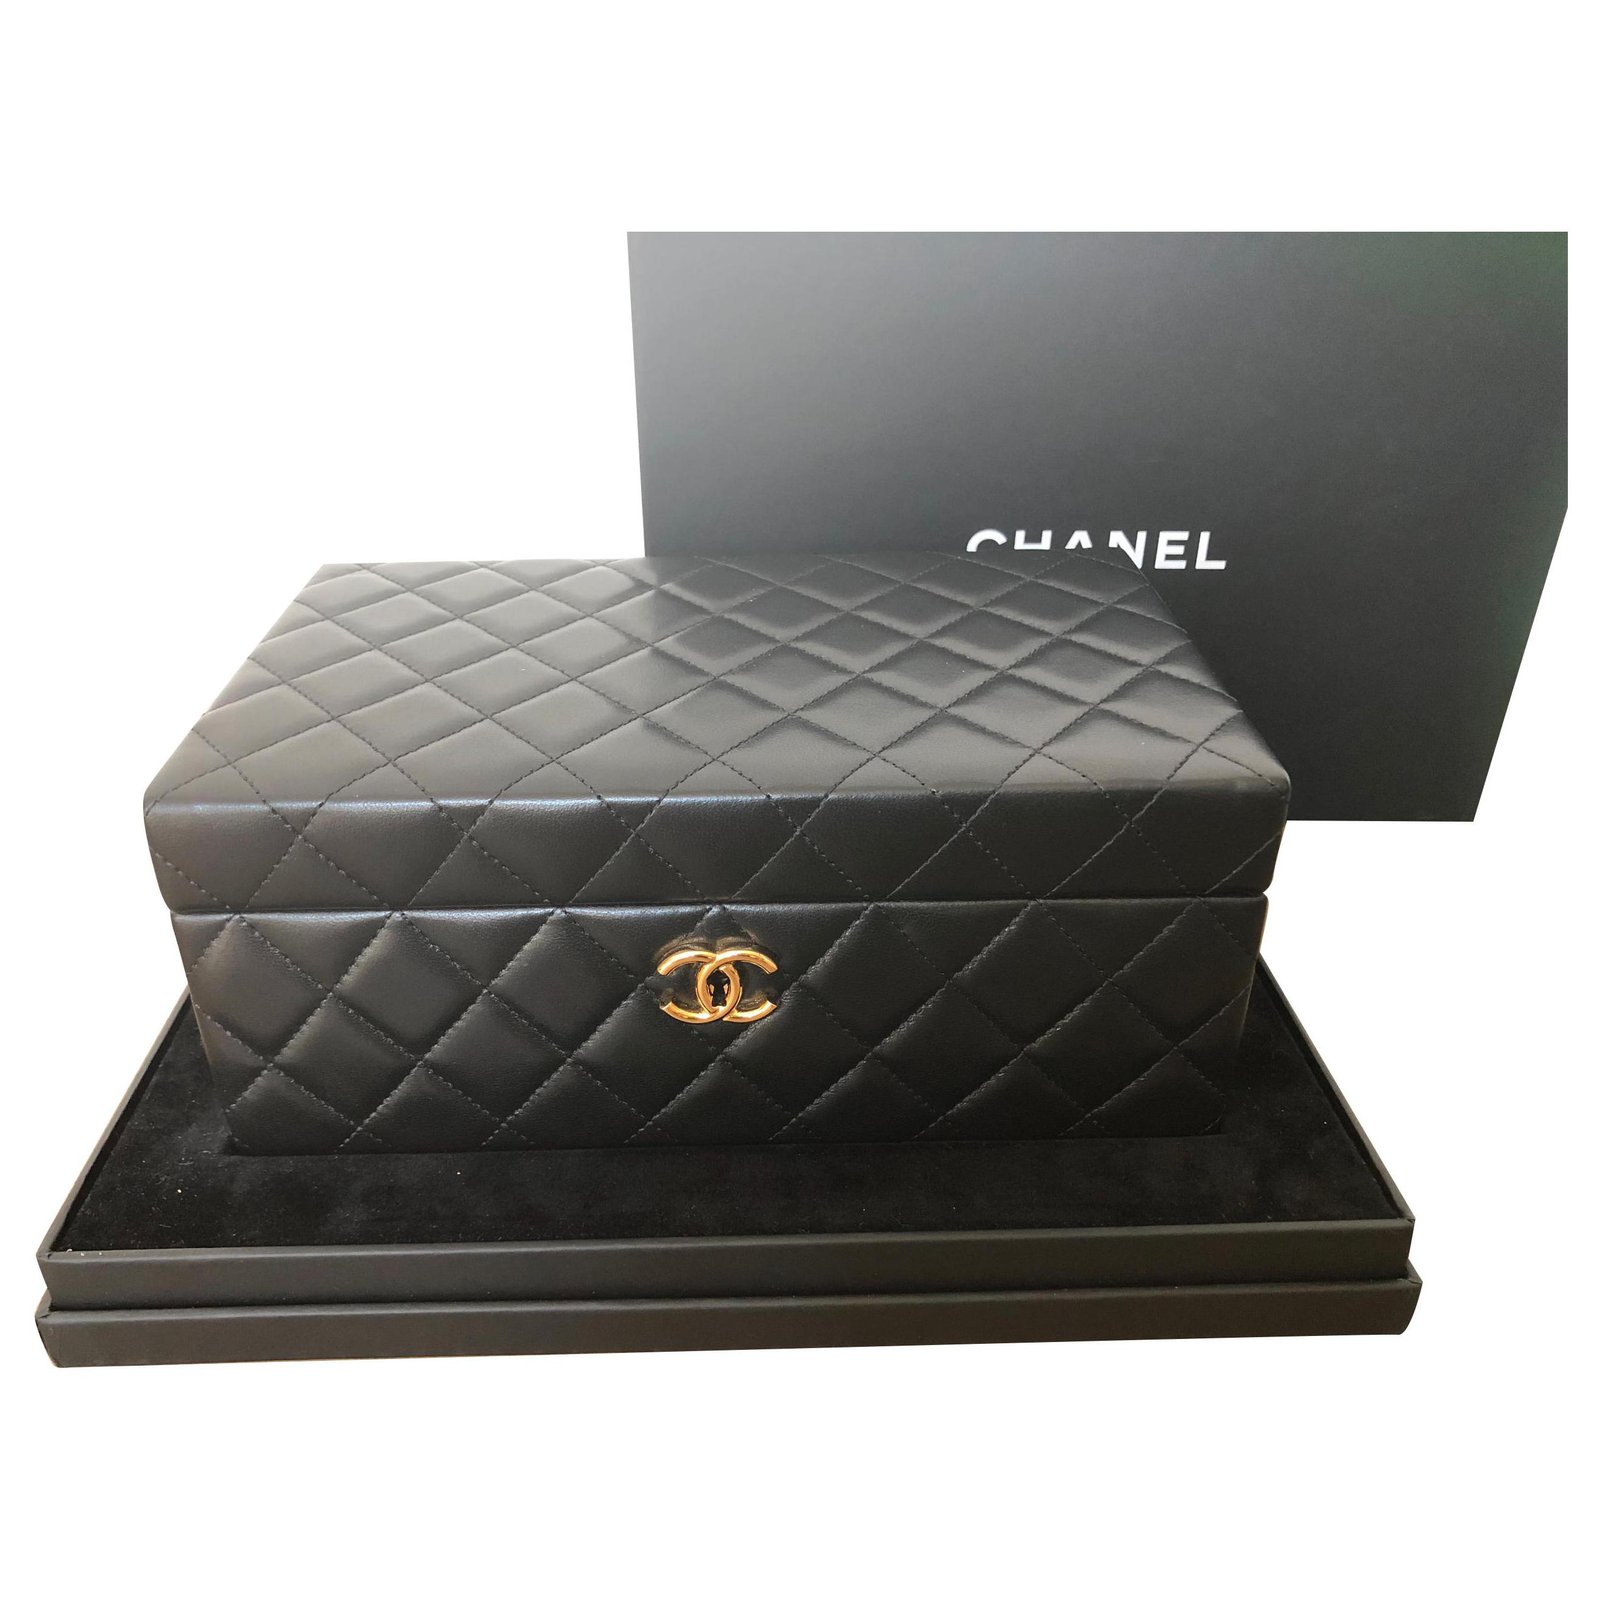 Brand New Chanel Jewelry Box with tag